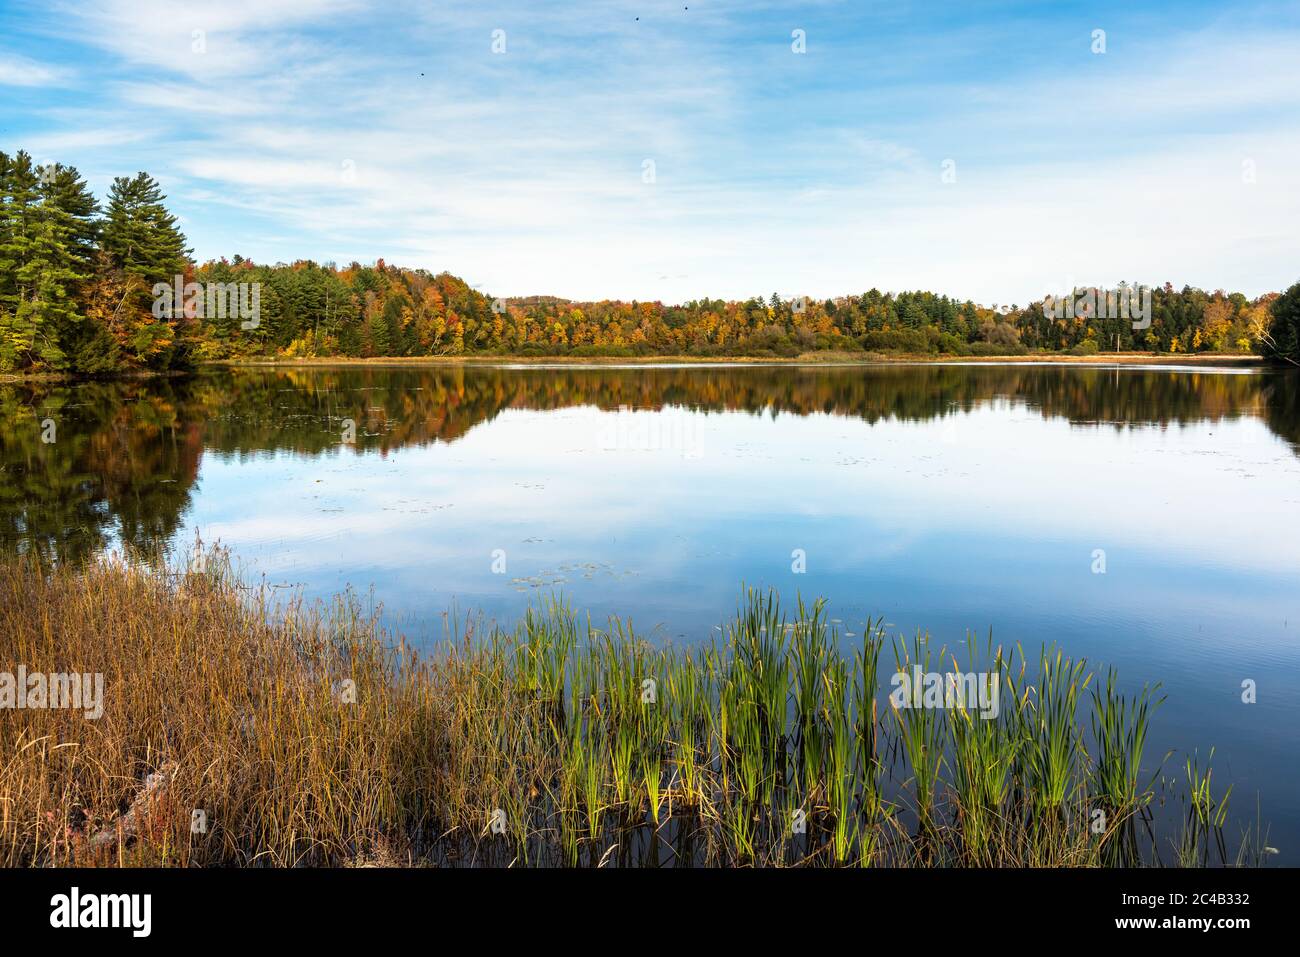 Tranquil scene with a lake surround by forest on a clear autumn day. Beautiful autumn colours and reflection in water. Stock Photo